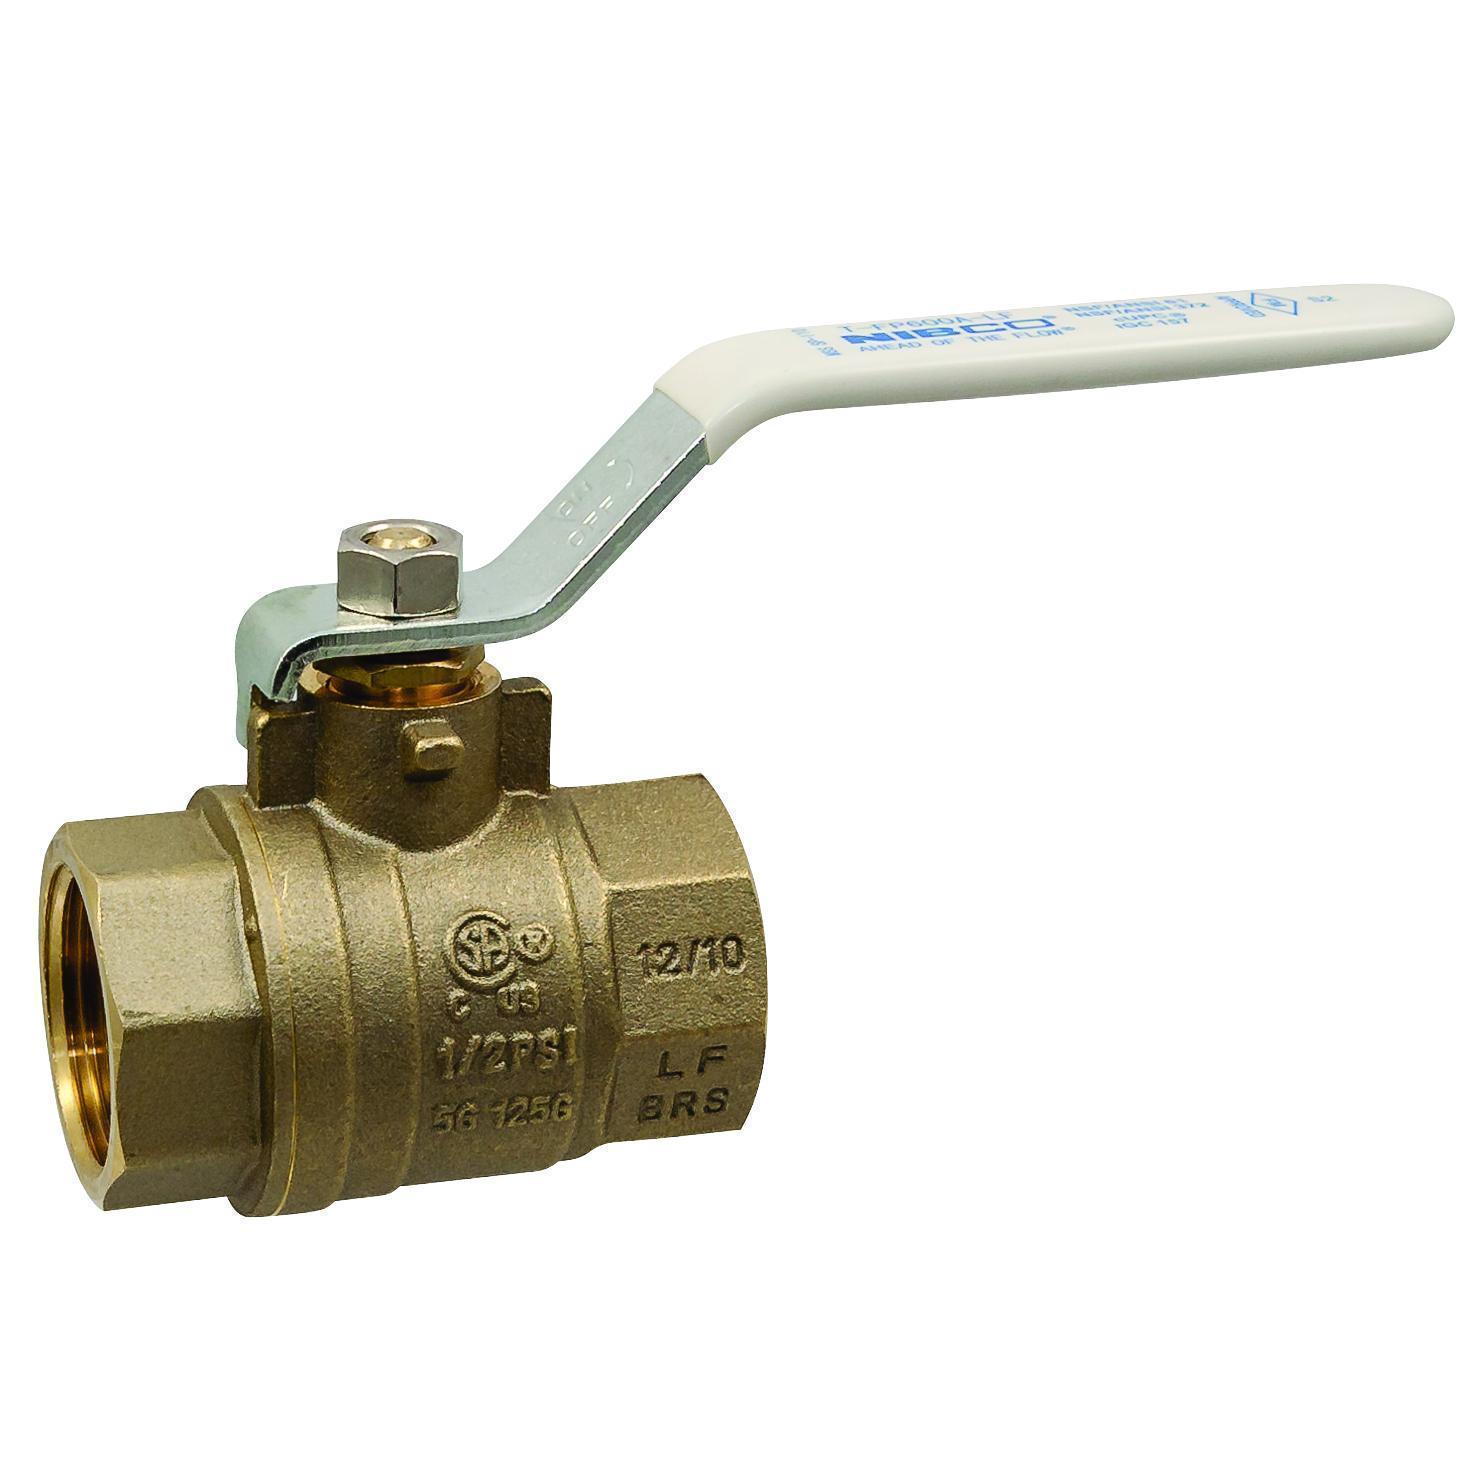 NIBCO® NL998X8 T-FP-600A-LF 2-Piece Ball Valve, 3/4 in Nominal, FNPT End Style, Brass Body, Full Port, PTFE Softgoods, Import